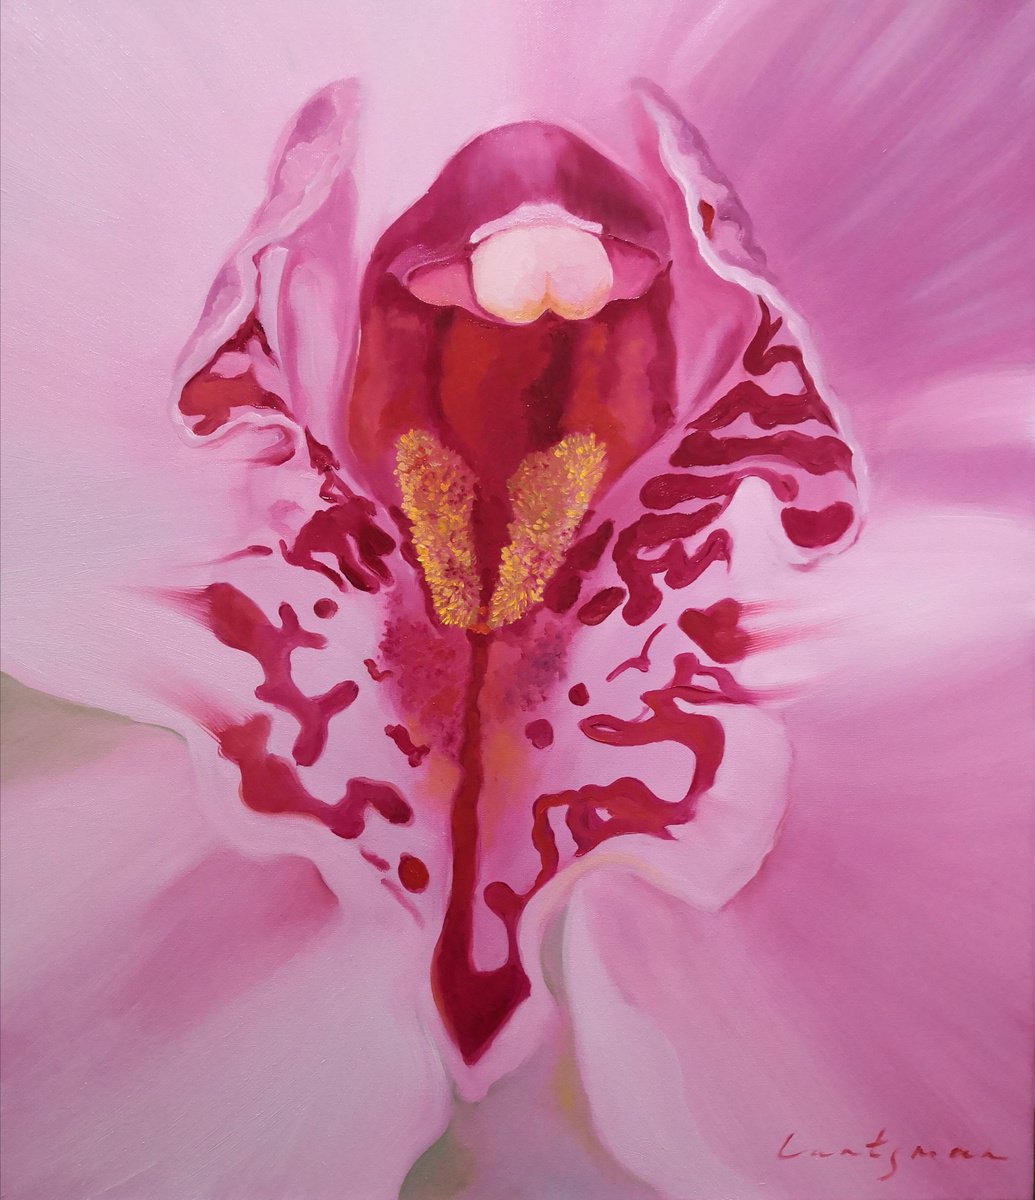 Orchid - a flower of femininity and passion, number 2 by Jane Lantsman